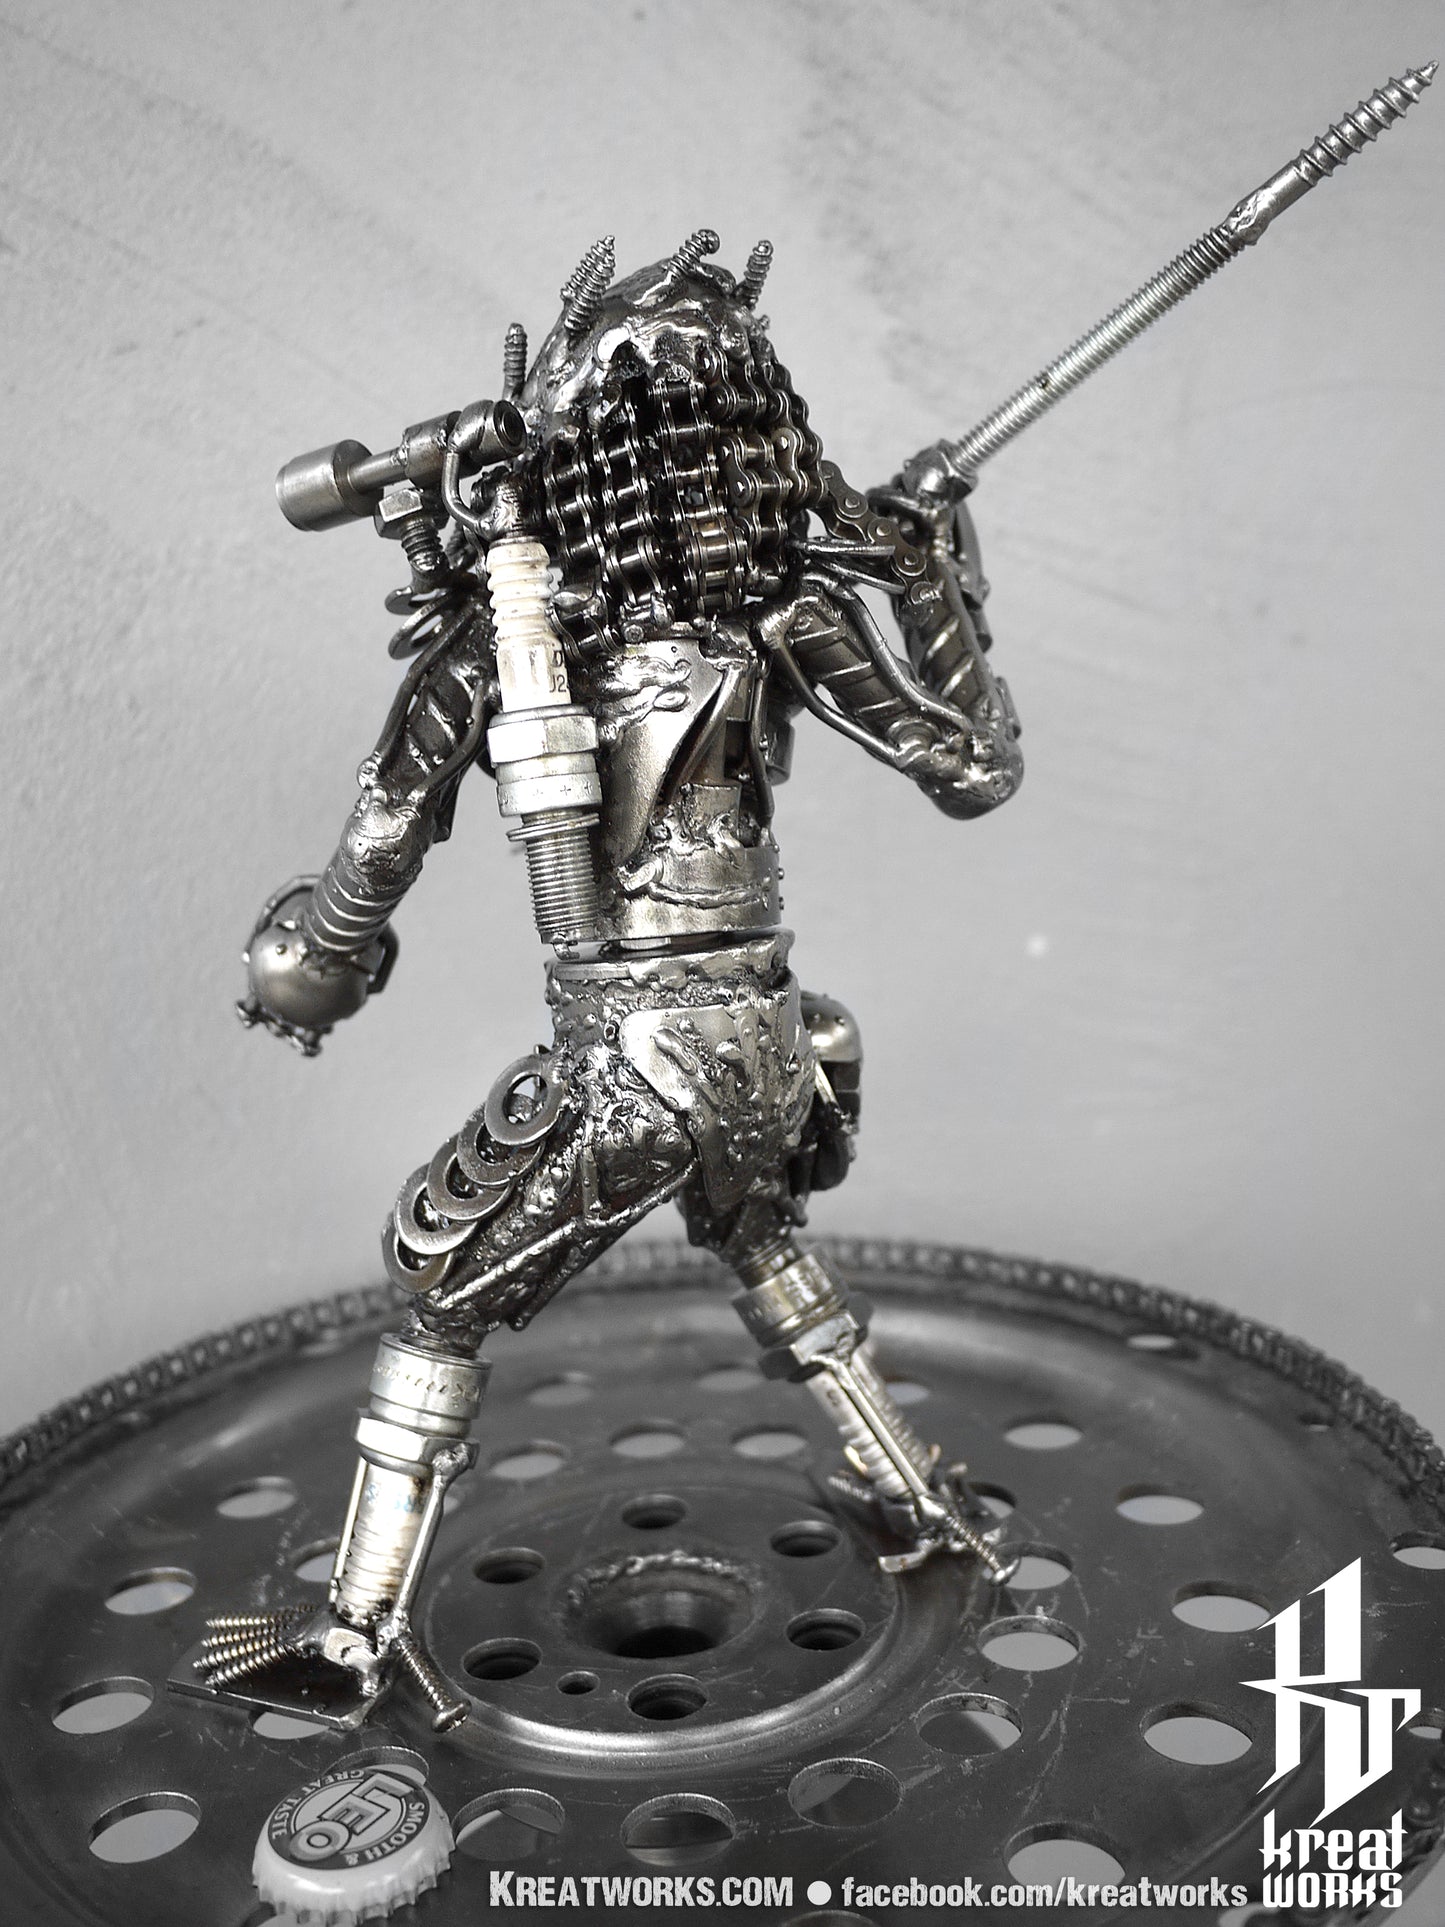 Mini Metal Hunter : Spear (small item) / Recycle Metal Sustainable Sculpture Art